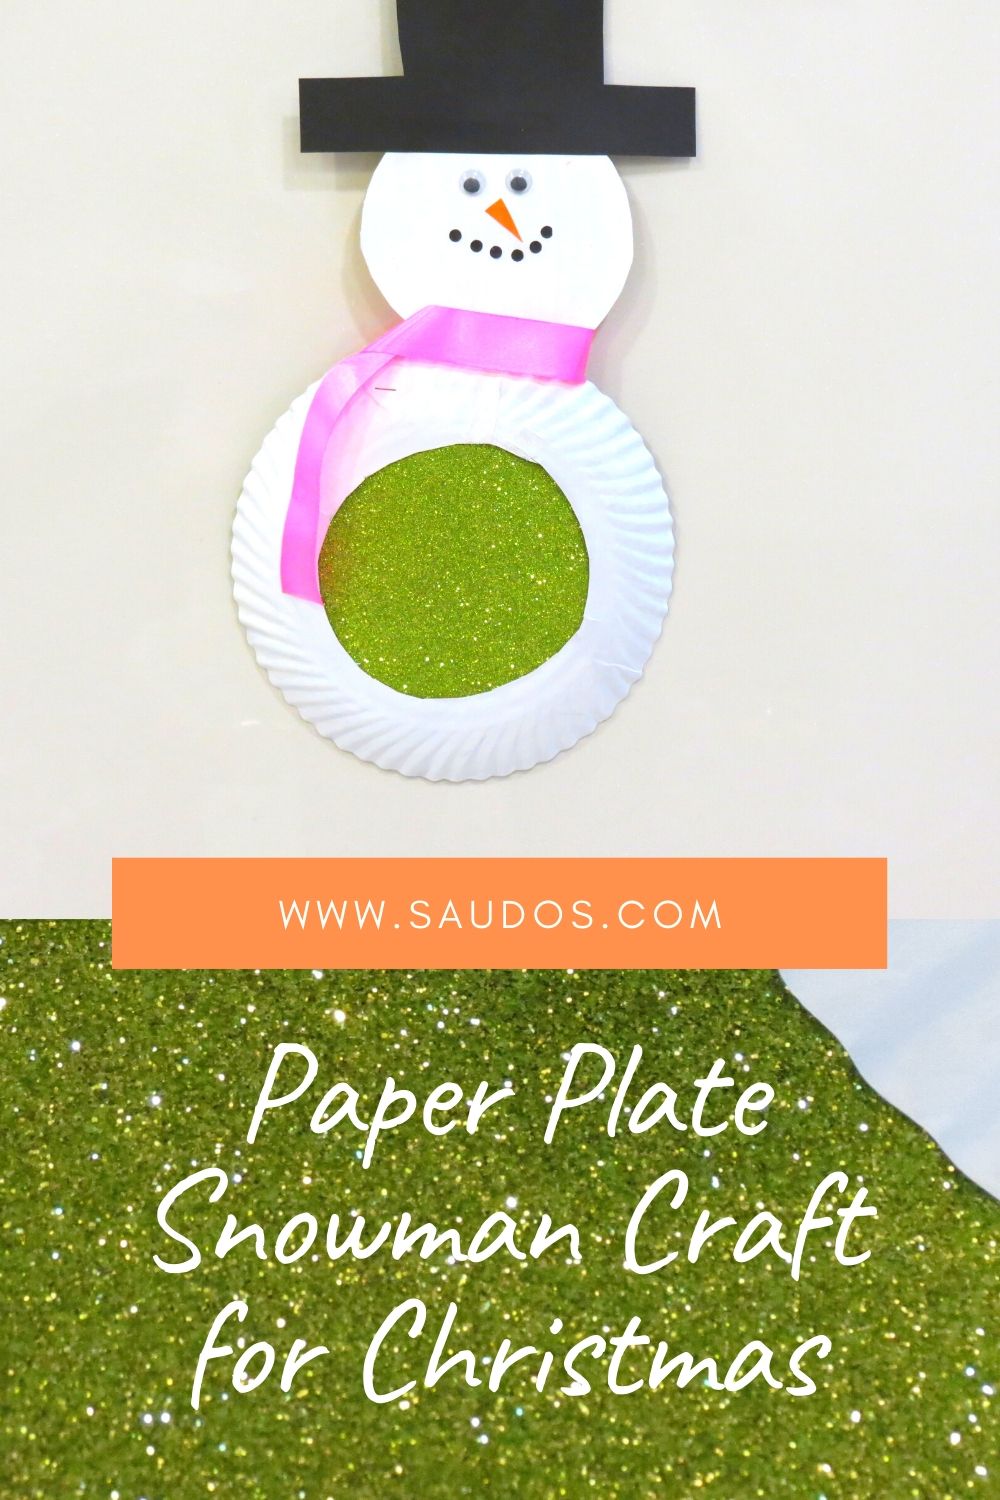 Paper Plate Snowman Craft for Christmas